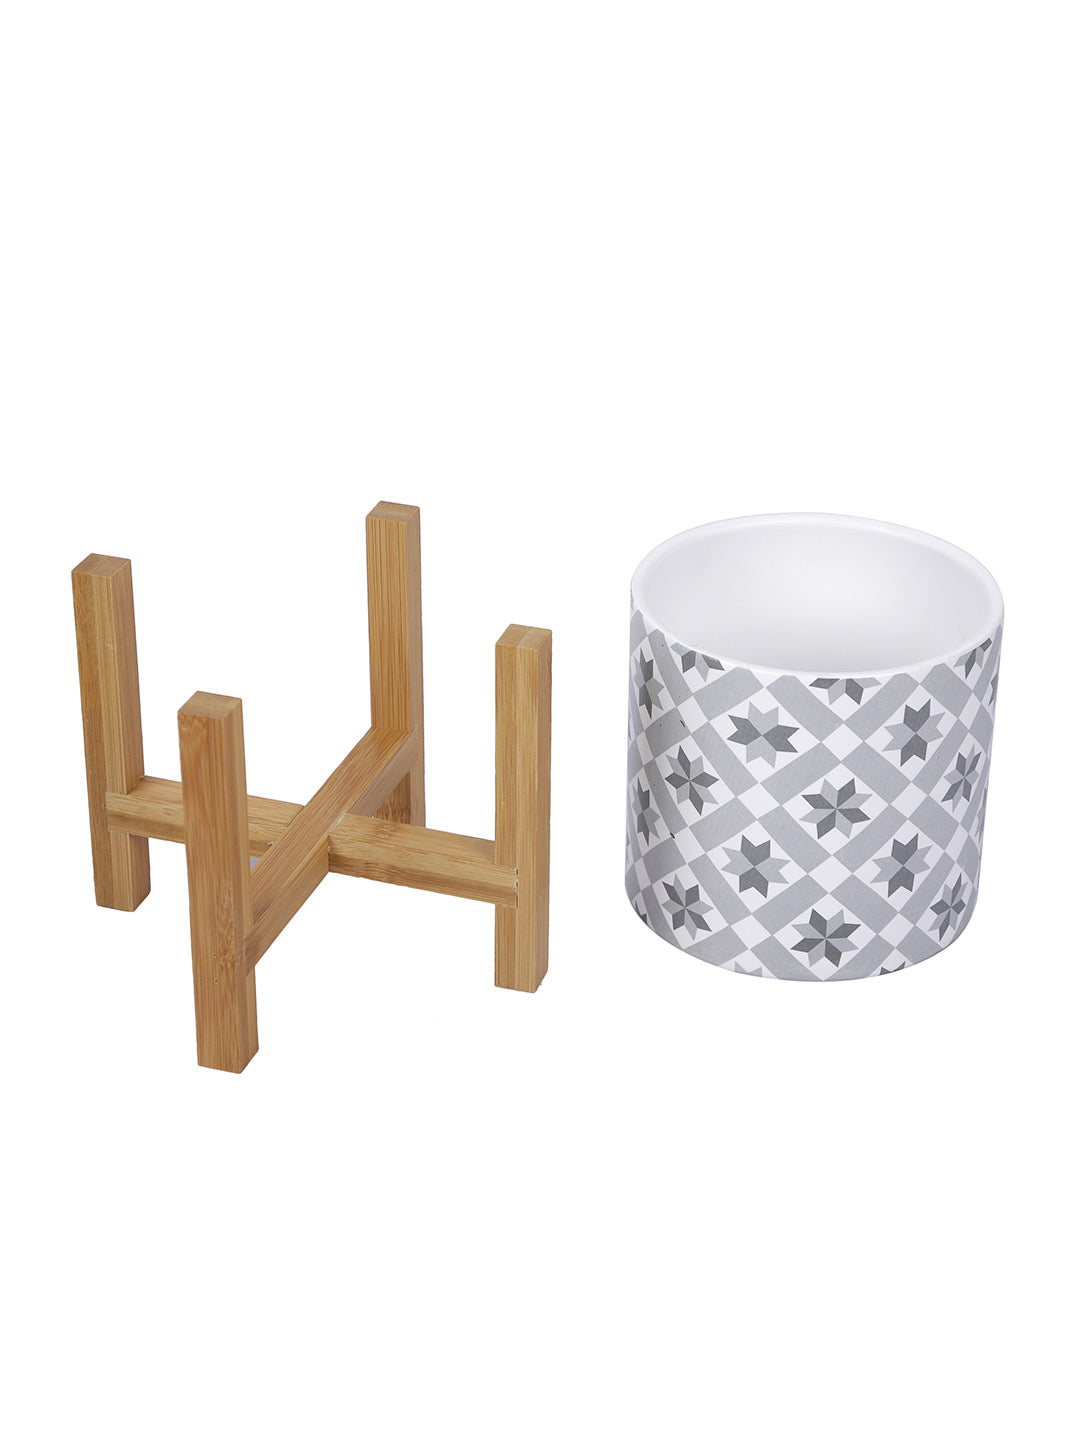 Ceramic Matte Planter with Wooden stand - Default Title (CHC22389A)